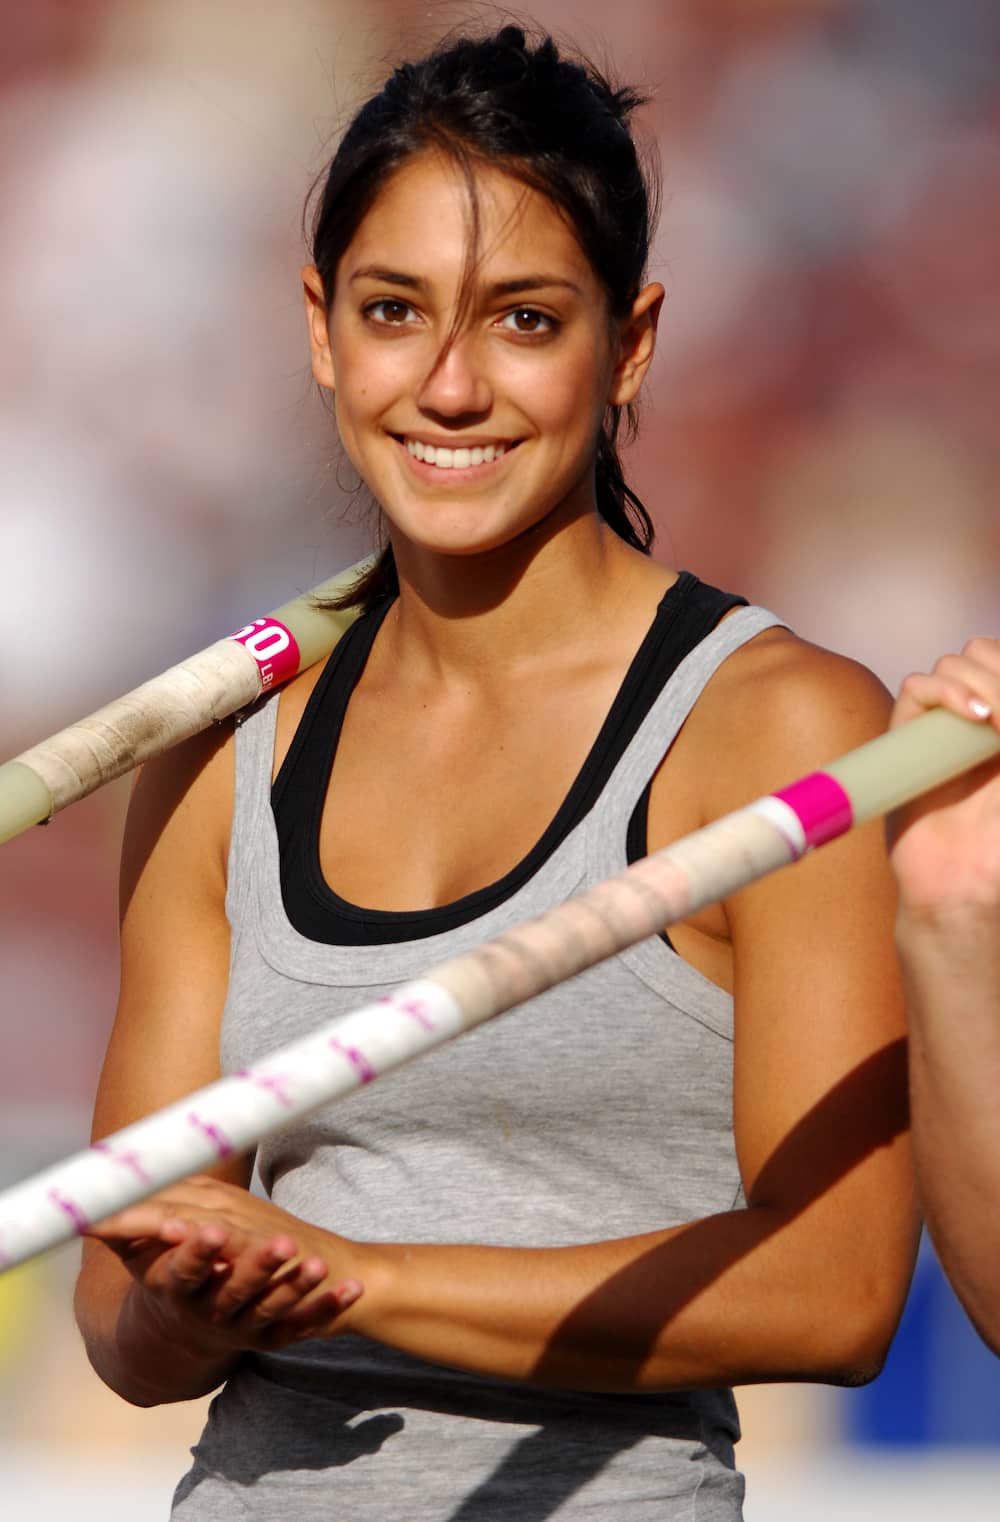 Allison Stokke: age, spouse, parents, height, wedding, college, profiles, worth